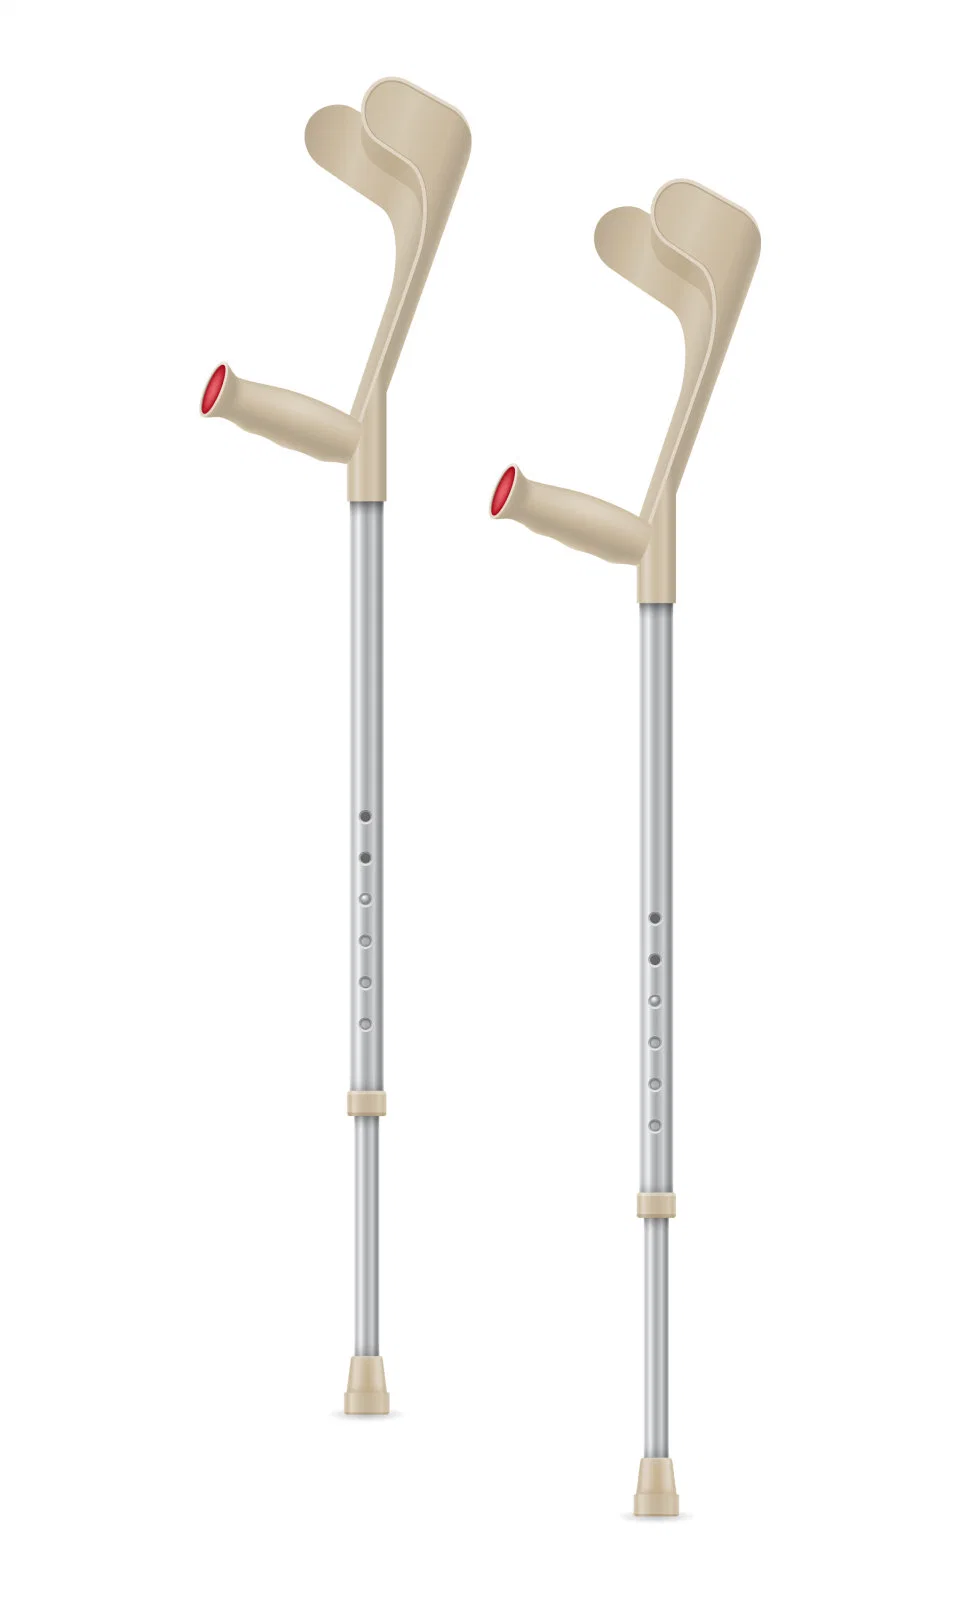 Carton Outdoor Brother Medical Mobilty Canes for Teh Blind Aluminum Crutches